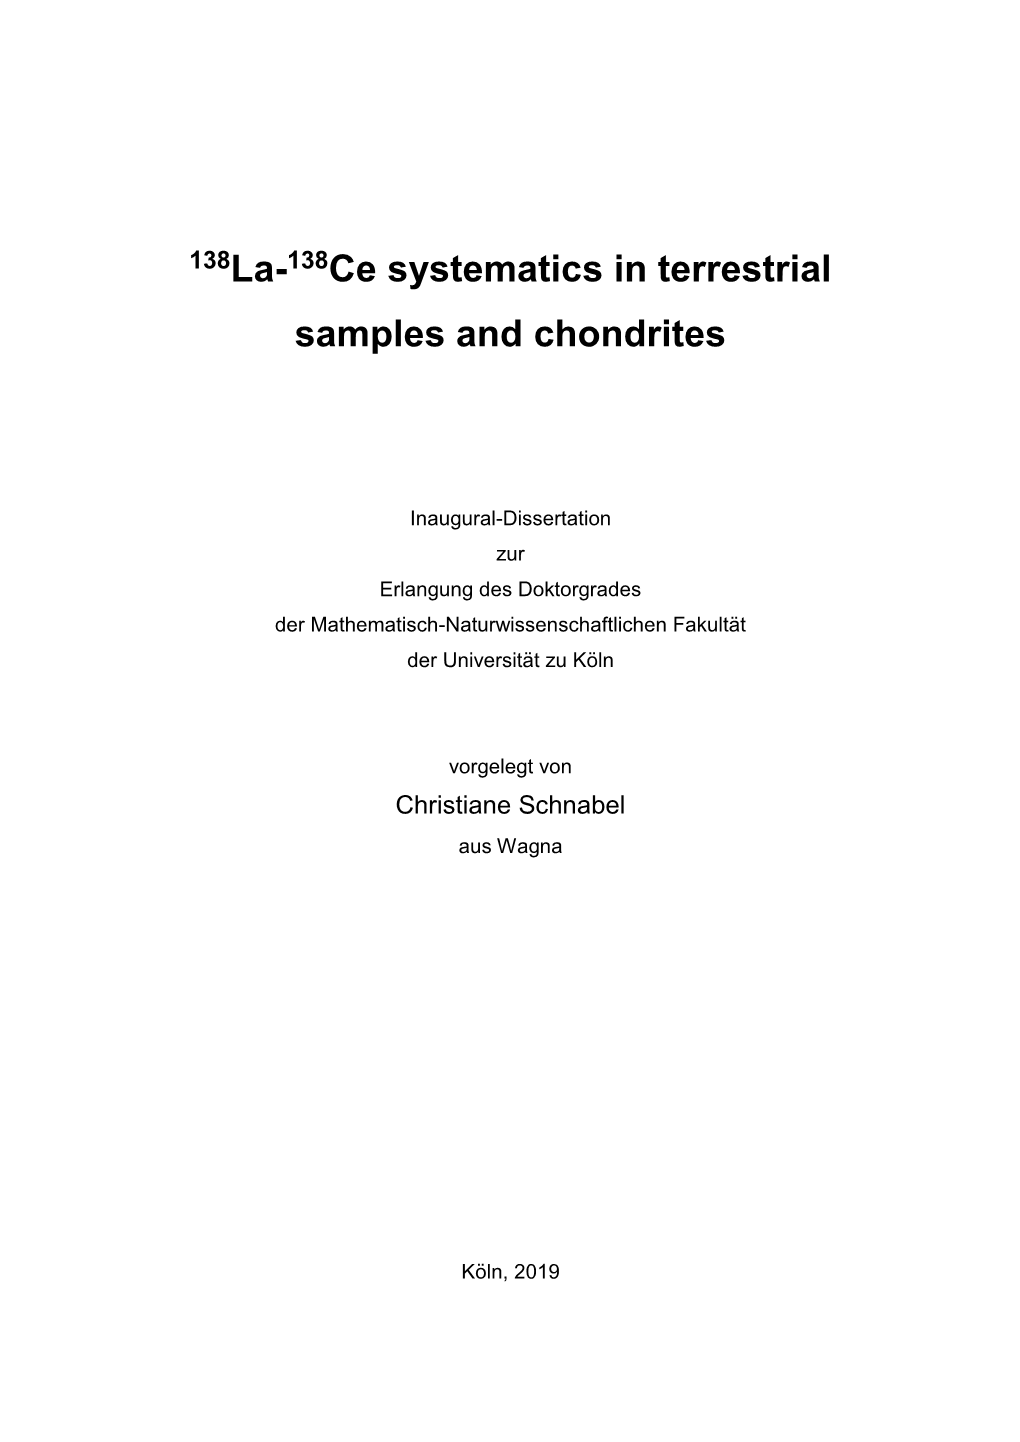 138La-138Ce Systematics in Terrestrial Samples and Chondrites